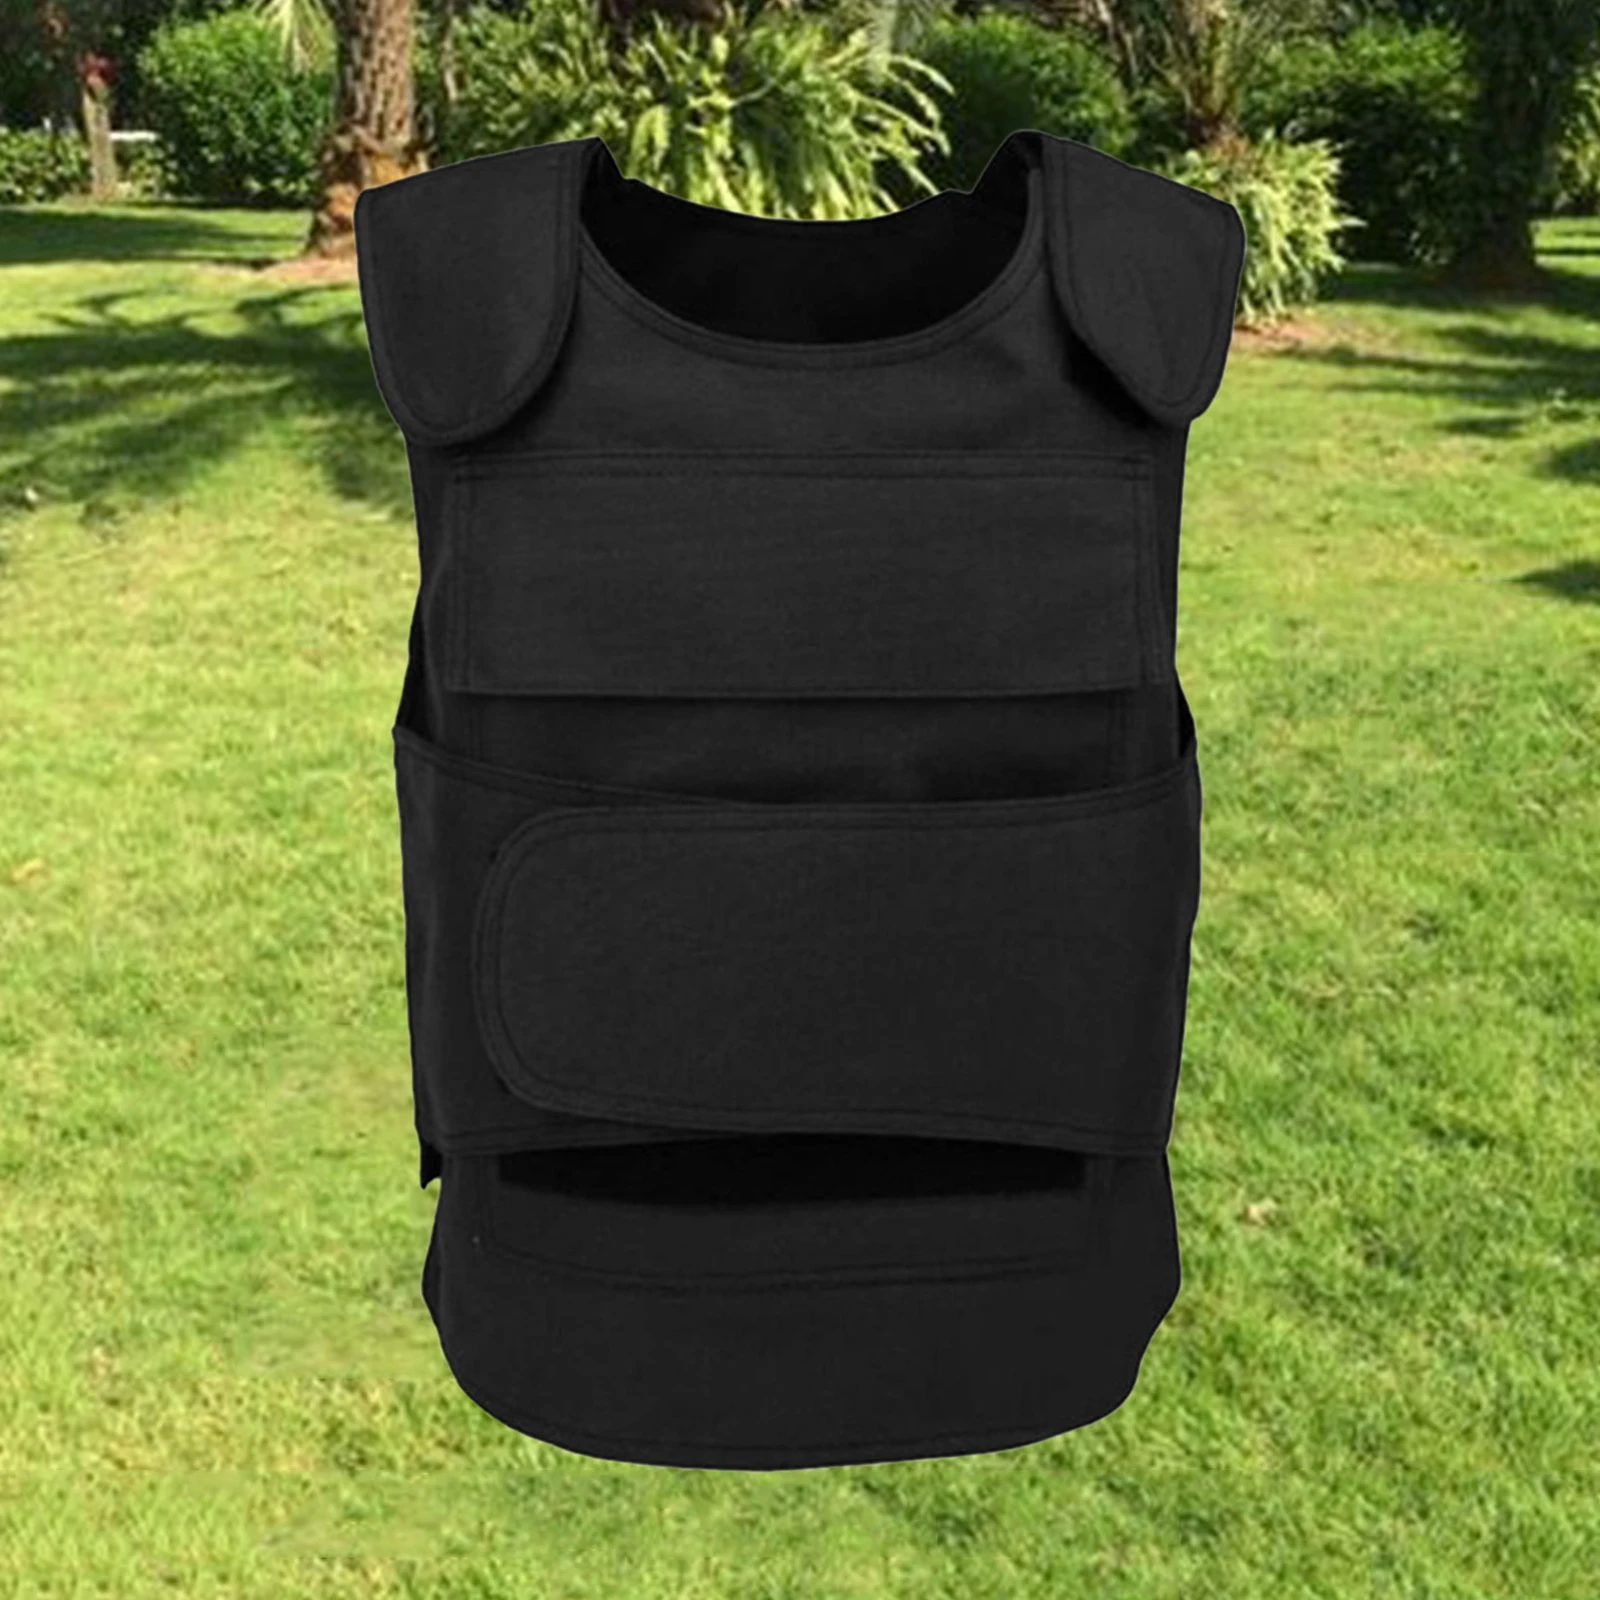  Ultra-Light Breathable Plate Carrier Paintball Training Vests